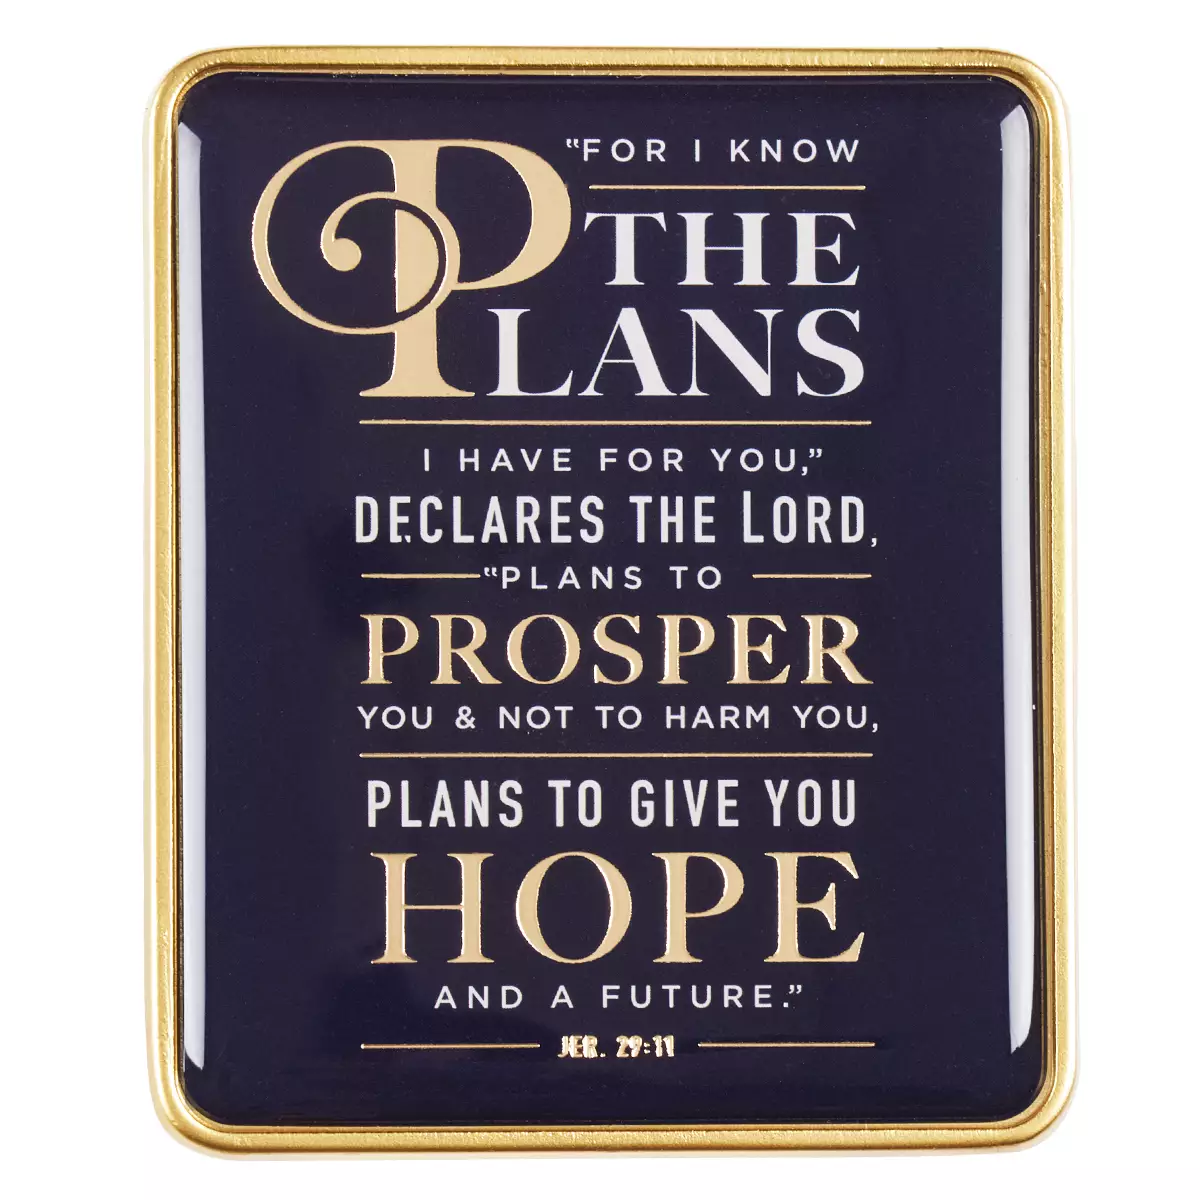 Visor Clip: For I Know the Plans - Jeremiah 29:11